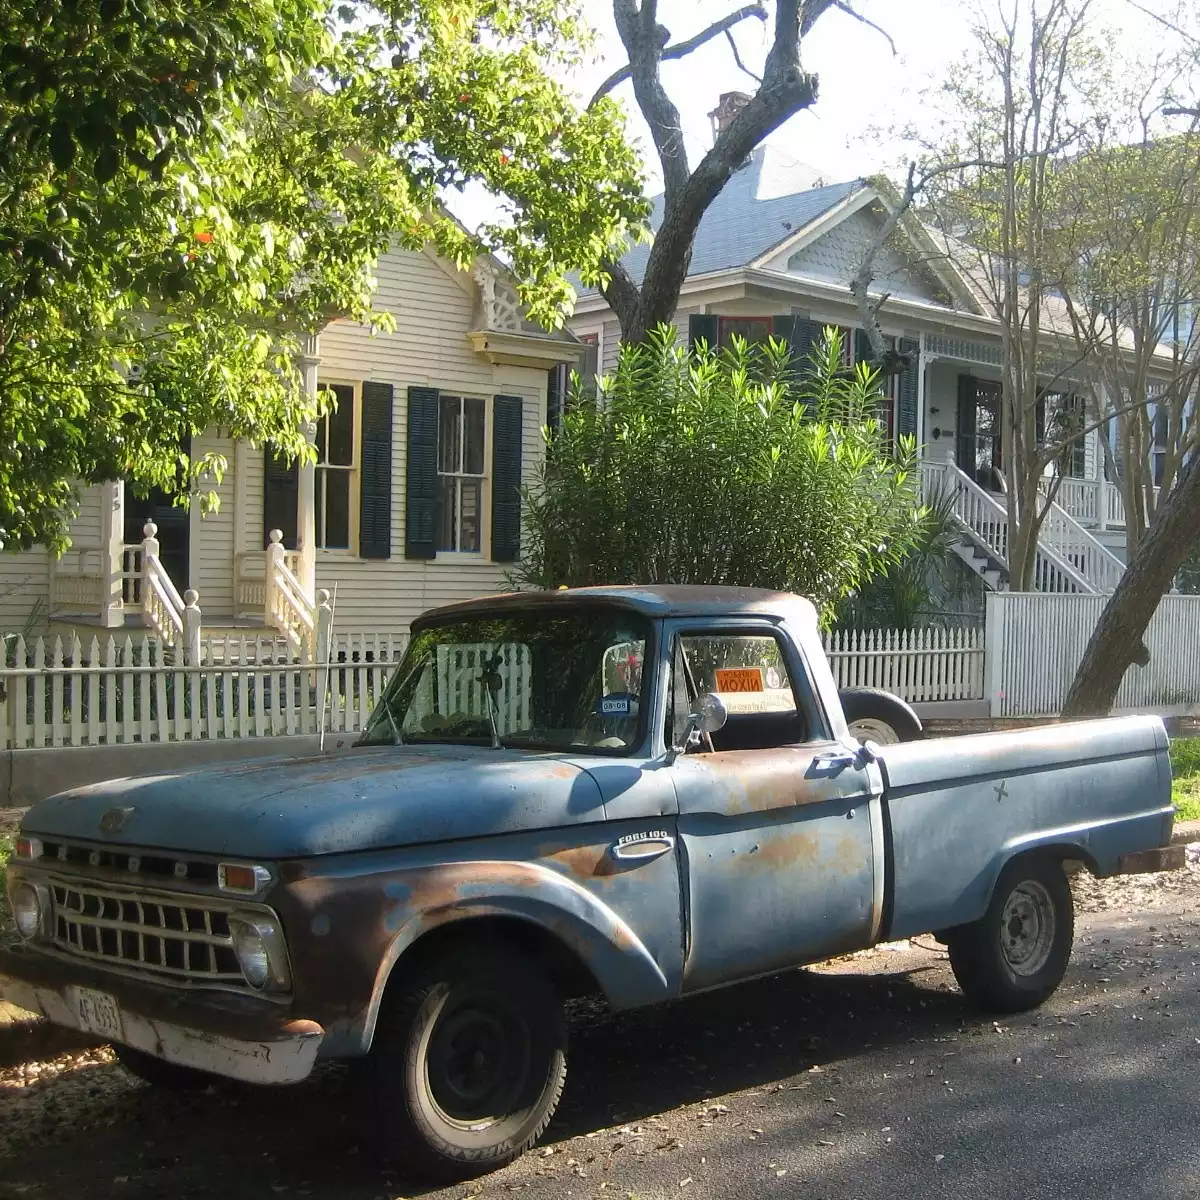 A vintage blue truck parked along the curb on a shady tree-lined avenue in front of a old-neighborhood house.